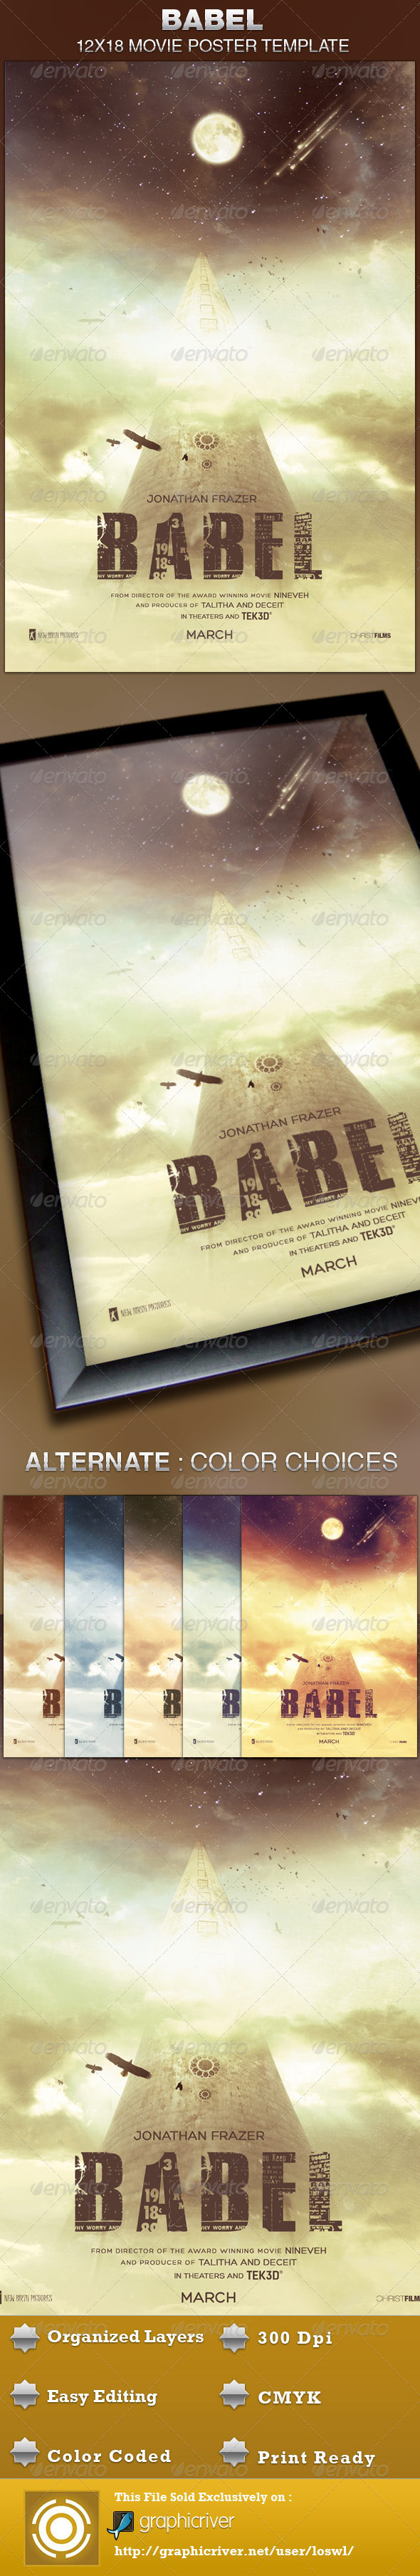 Babel Movie Poster Template